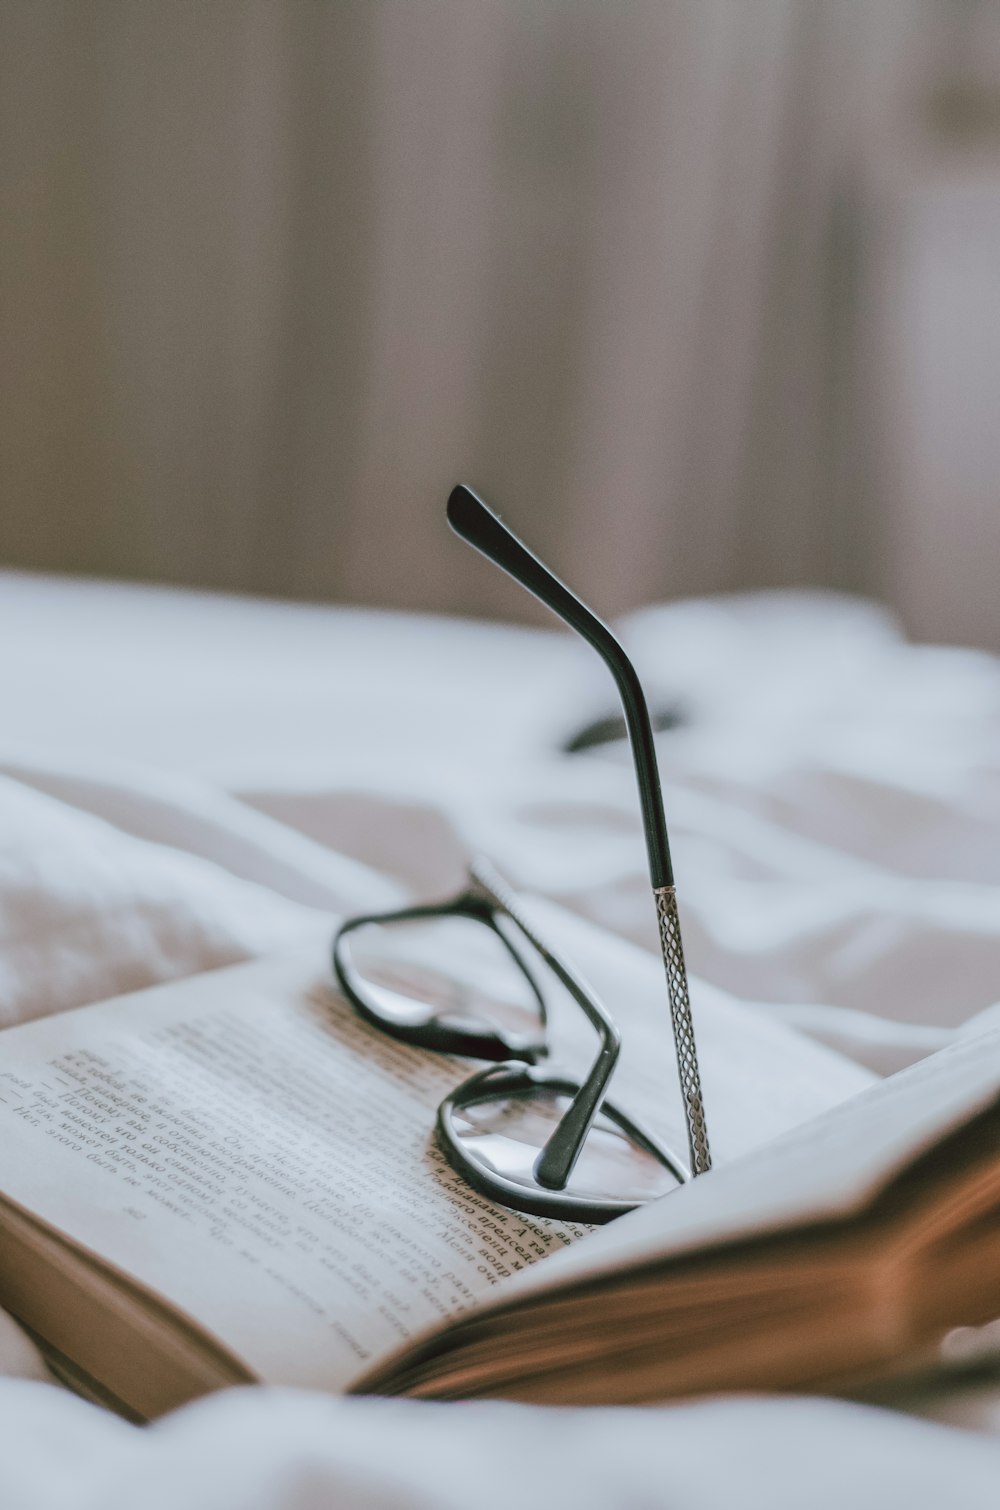 a pair of reading glasses resting on an open book